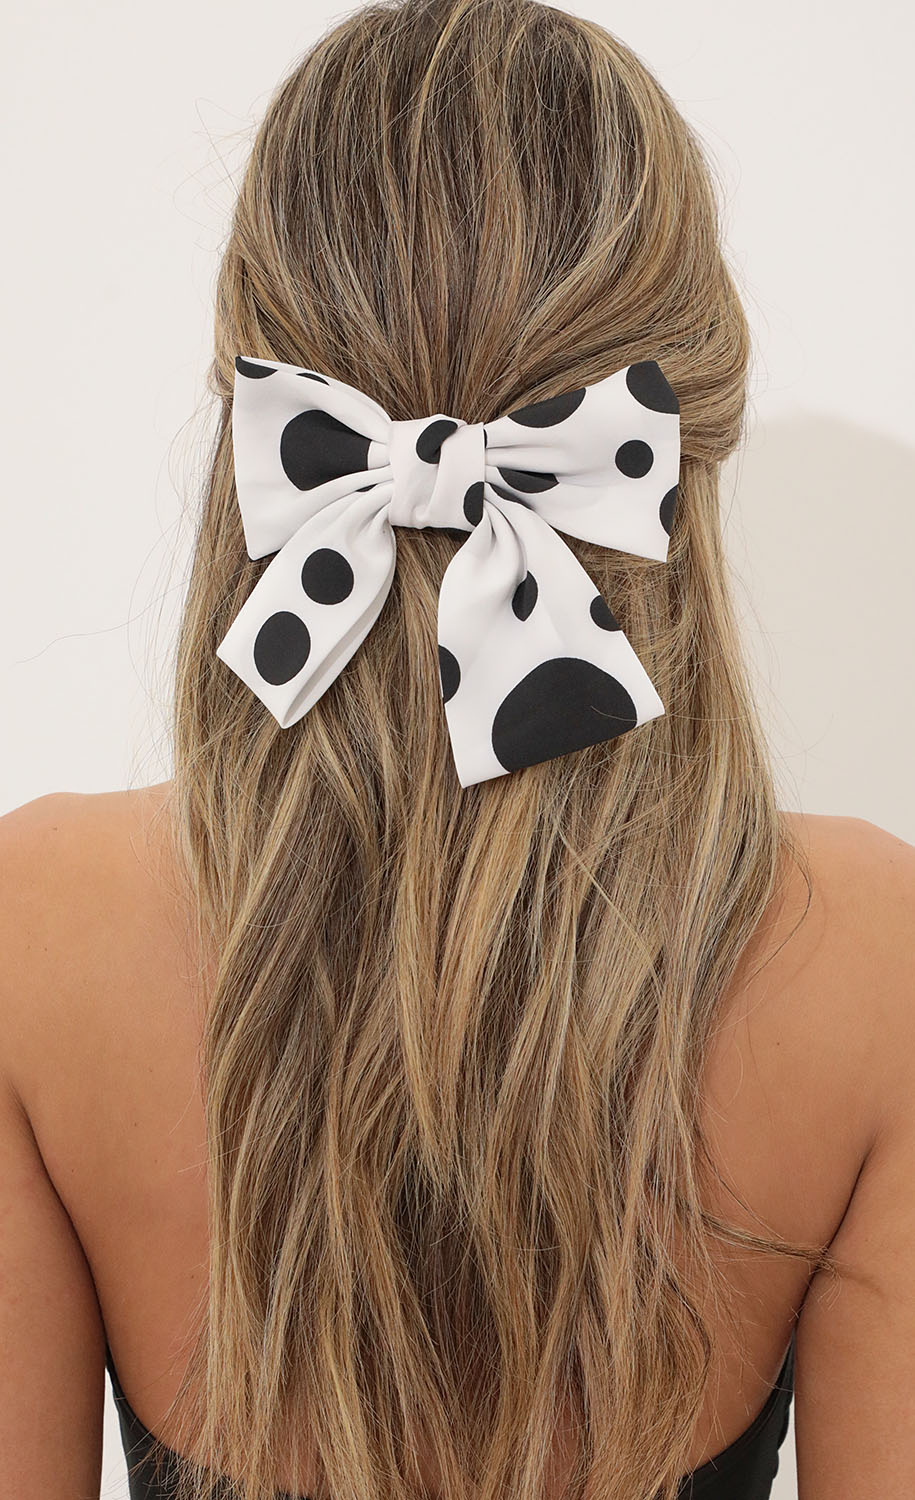 Brunch With The Girls Hair Clip in Black and White